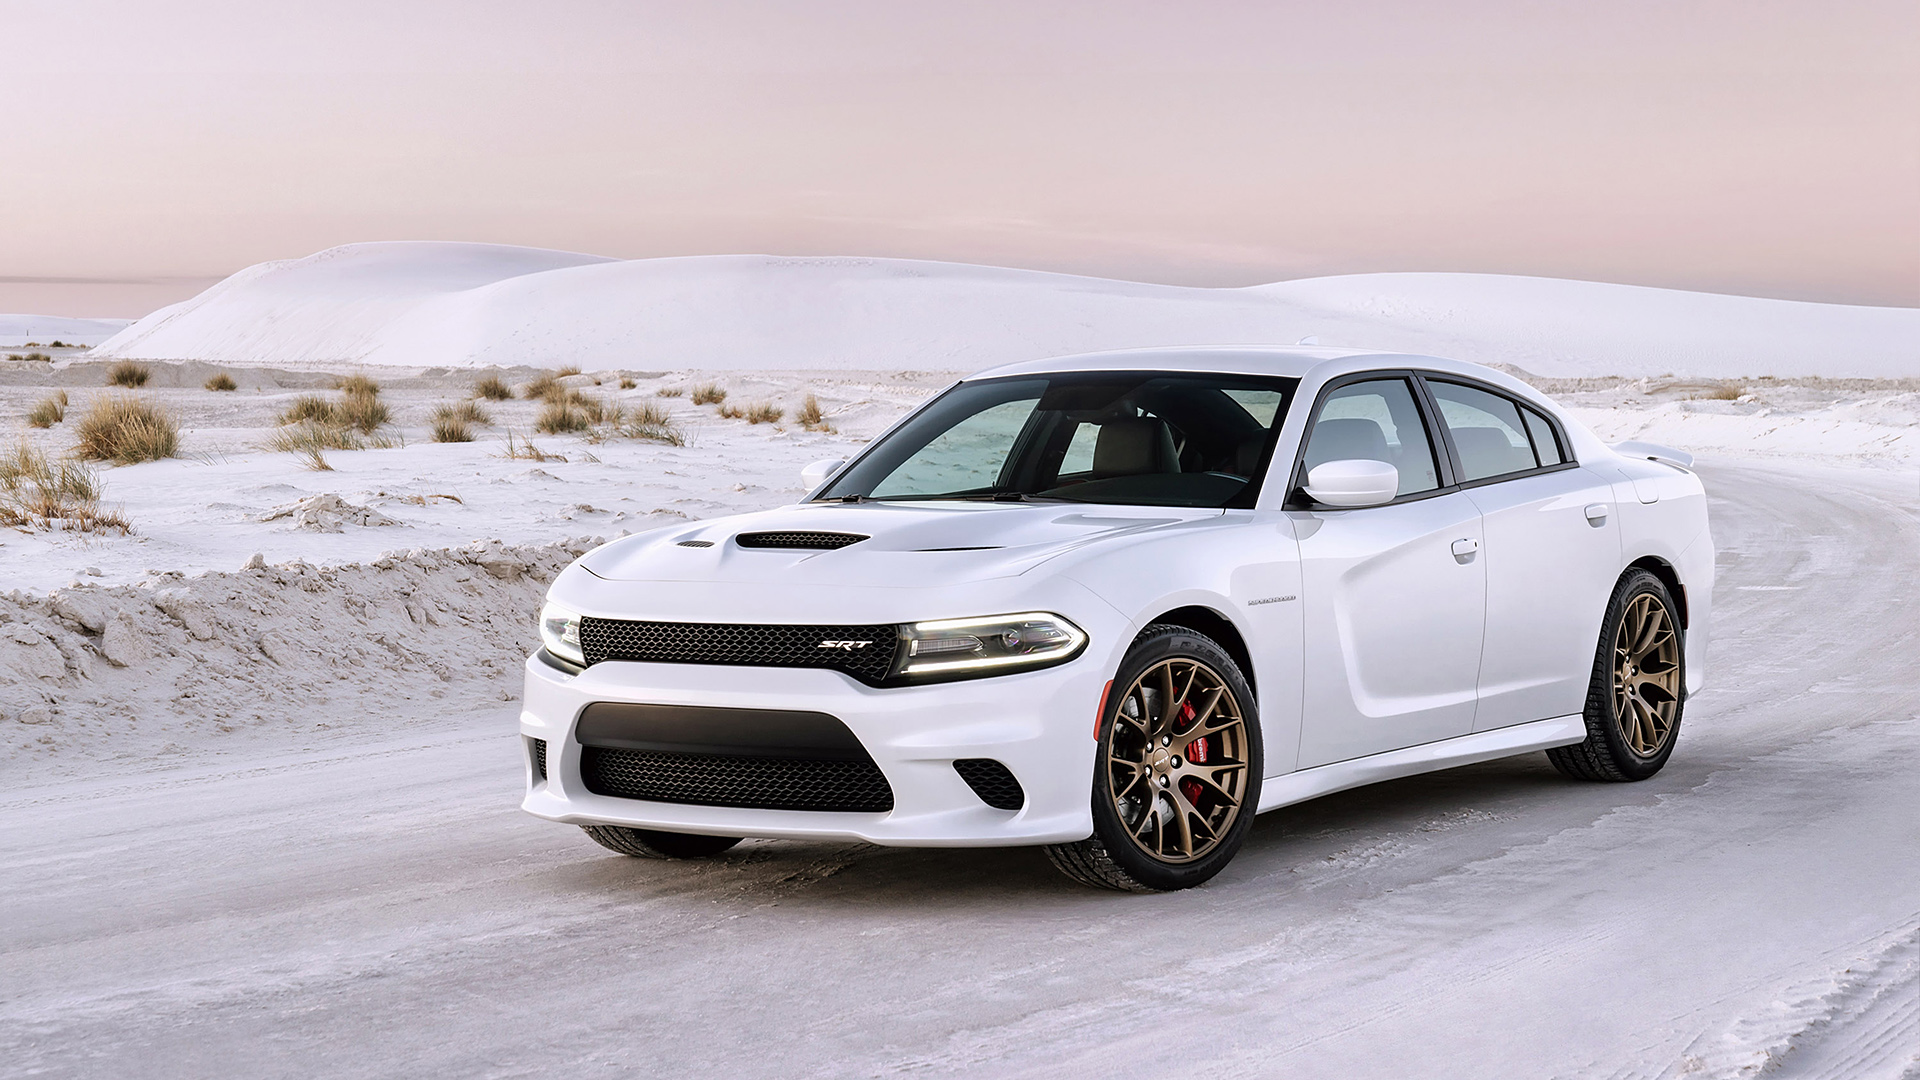 2015 Dodge Charger SRT Hellcat Wallpapers HD Images   WSupercars